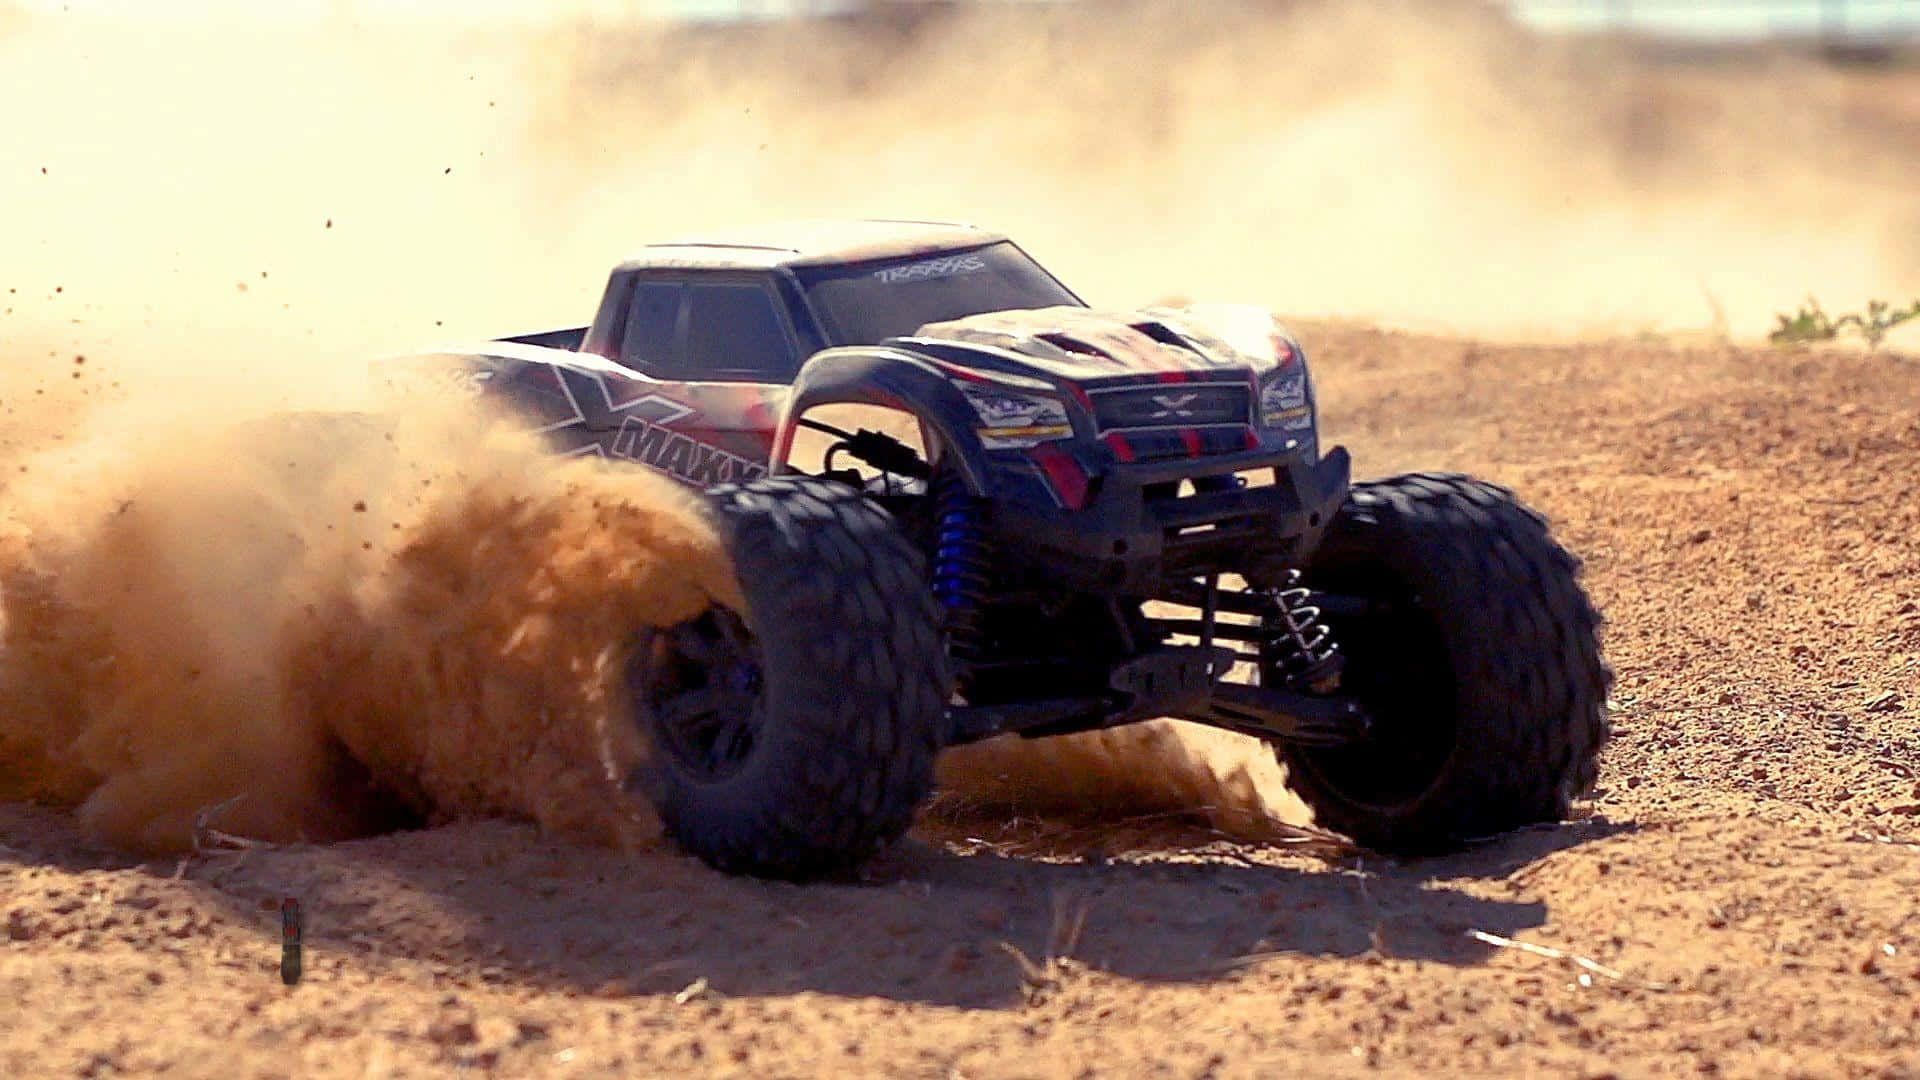 Race your way to victory with this RC car Wallpaper